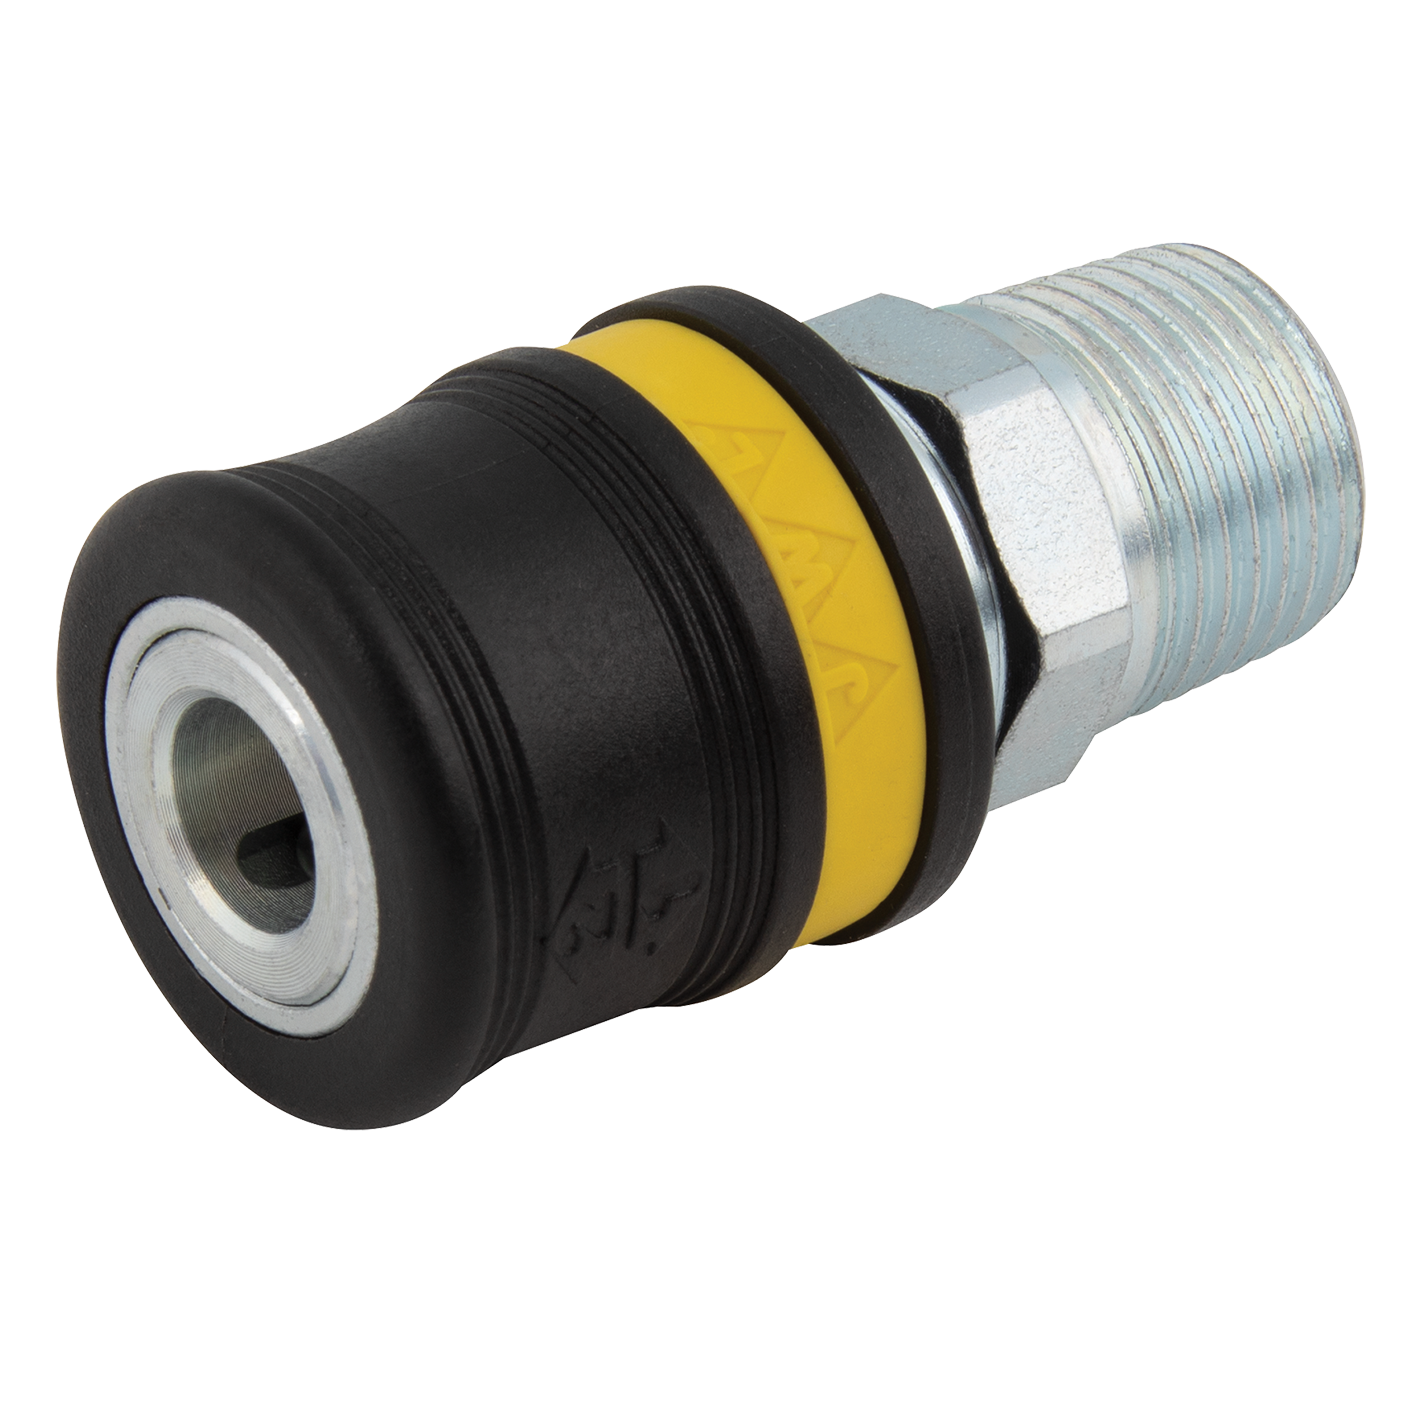 3/8" BSPT Male Safety Coupling